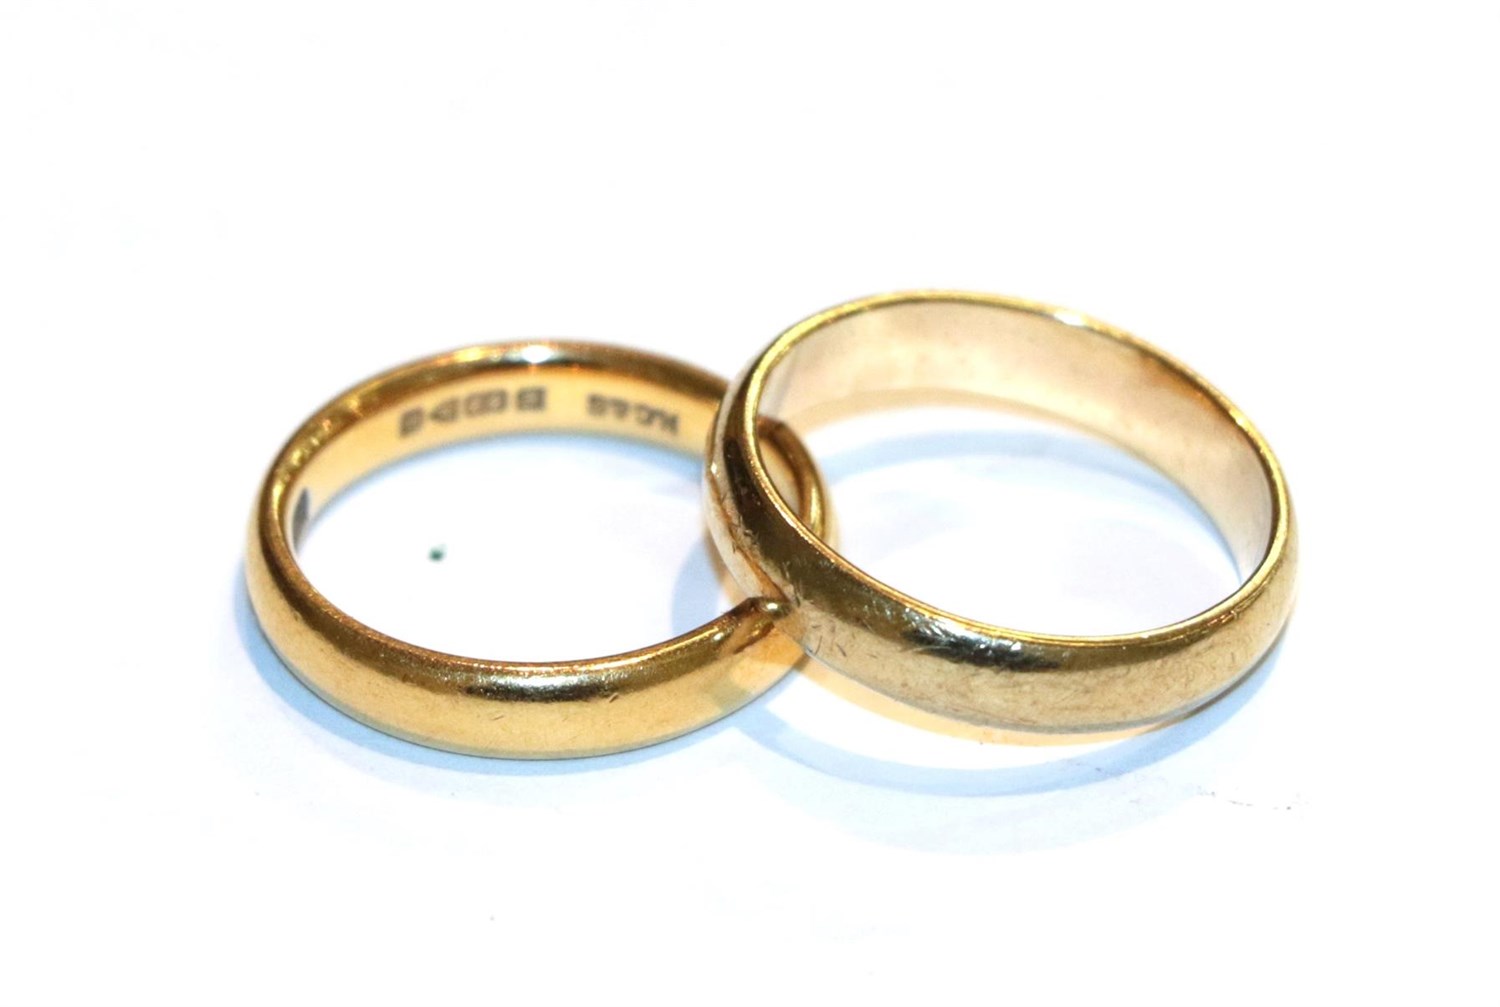 Lot 69 - A 22 carat gold band ring, finger size N and a 9 carat gold band ring, finger size P1/2